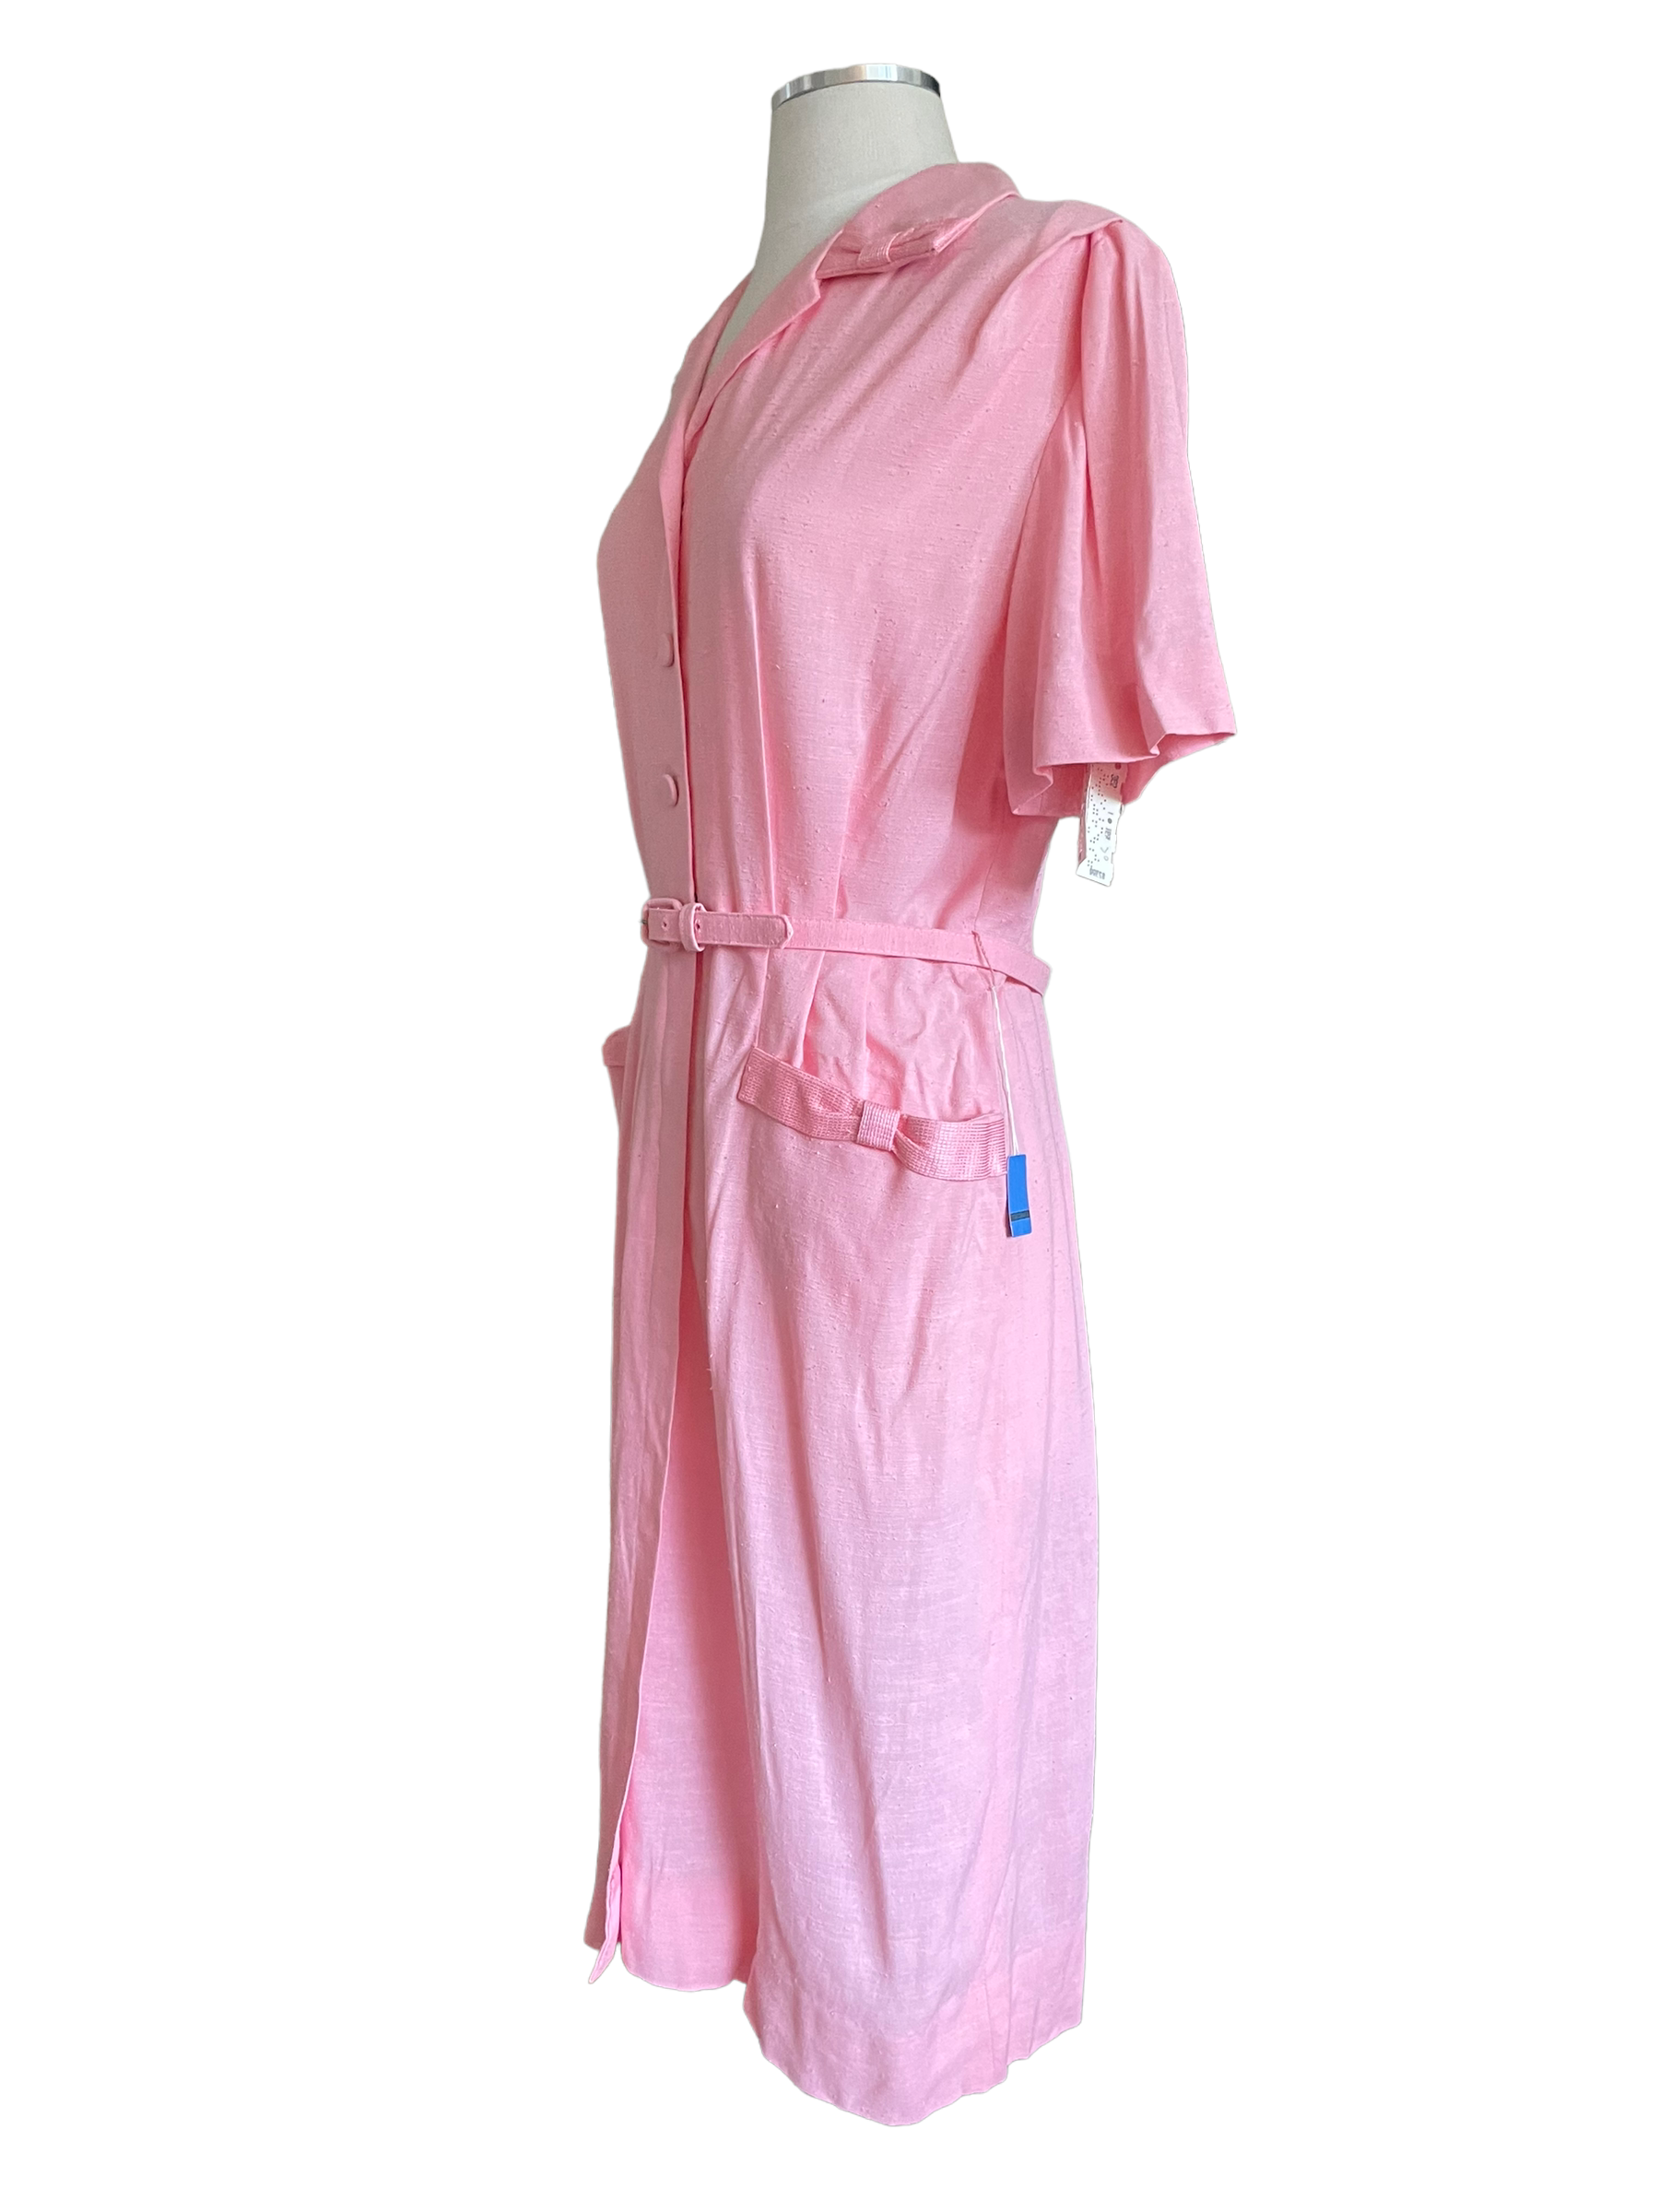 Vintage 1950s Deadstock Lordleigh Light Pink Silk and Rayon Dress SZ M |  Barn Owl Vintage | Seattle Vintage Dresses Full left side view.